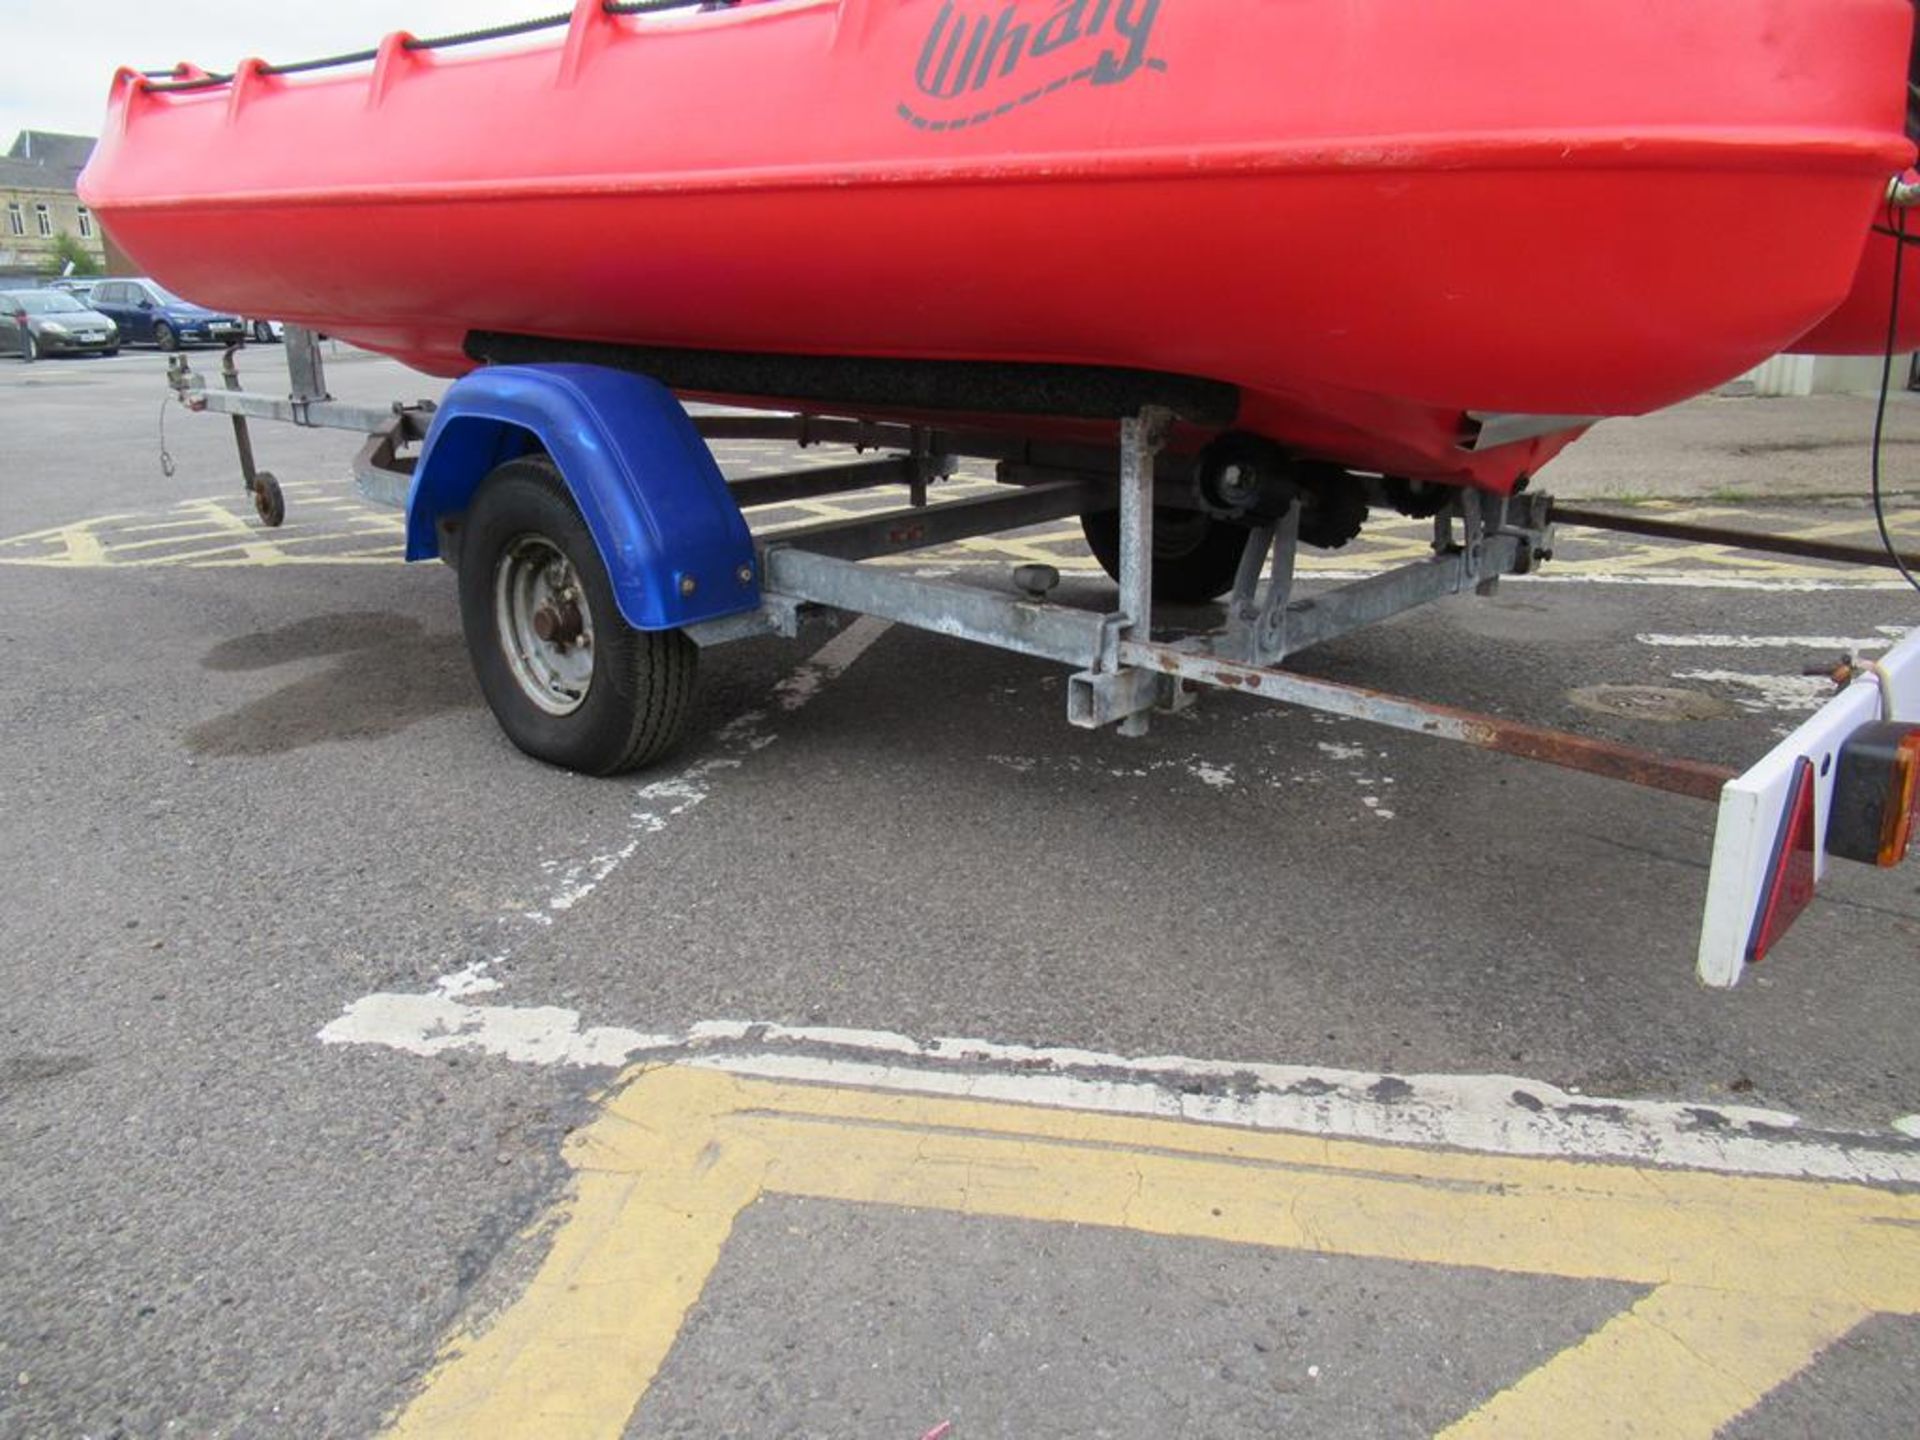 Whaly 435 Plastic Boat with Yamaha 30 Outboard - Image 17 of 48